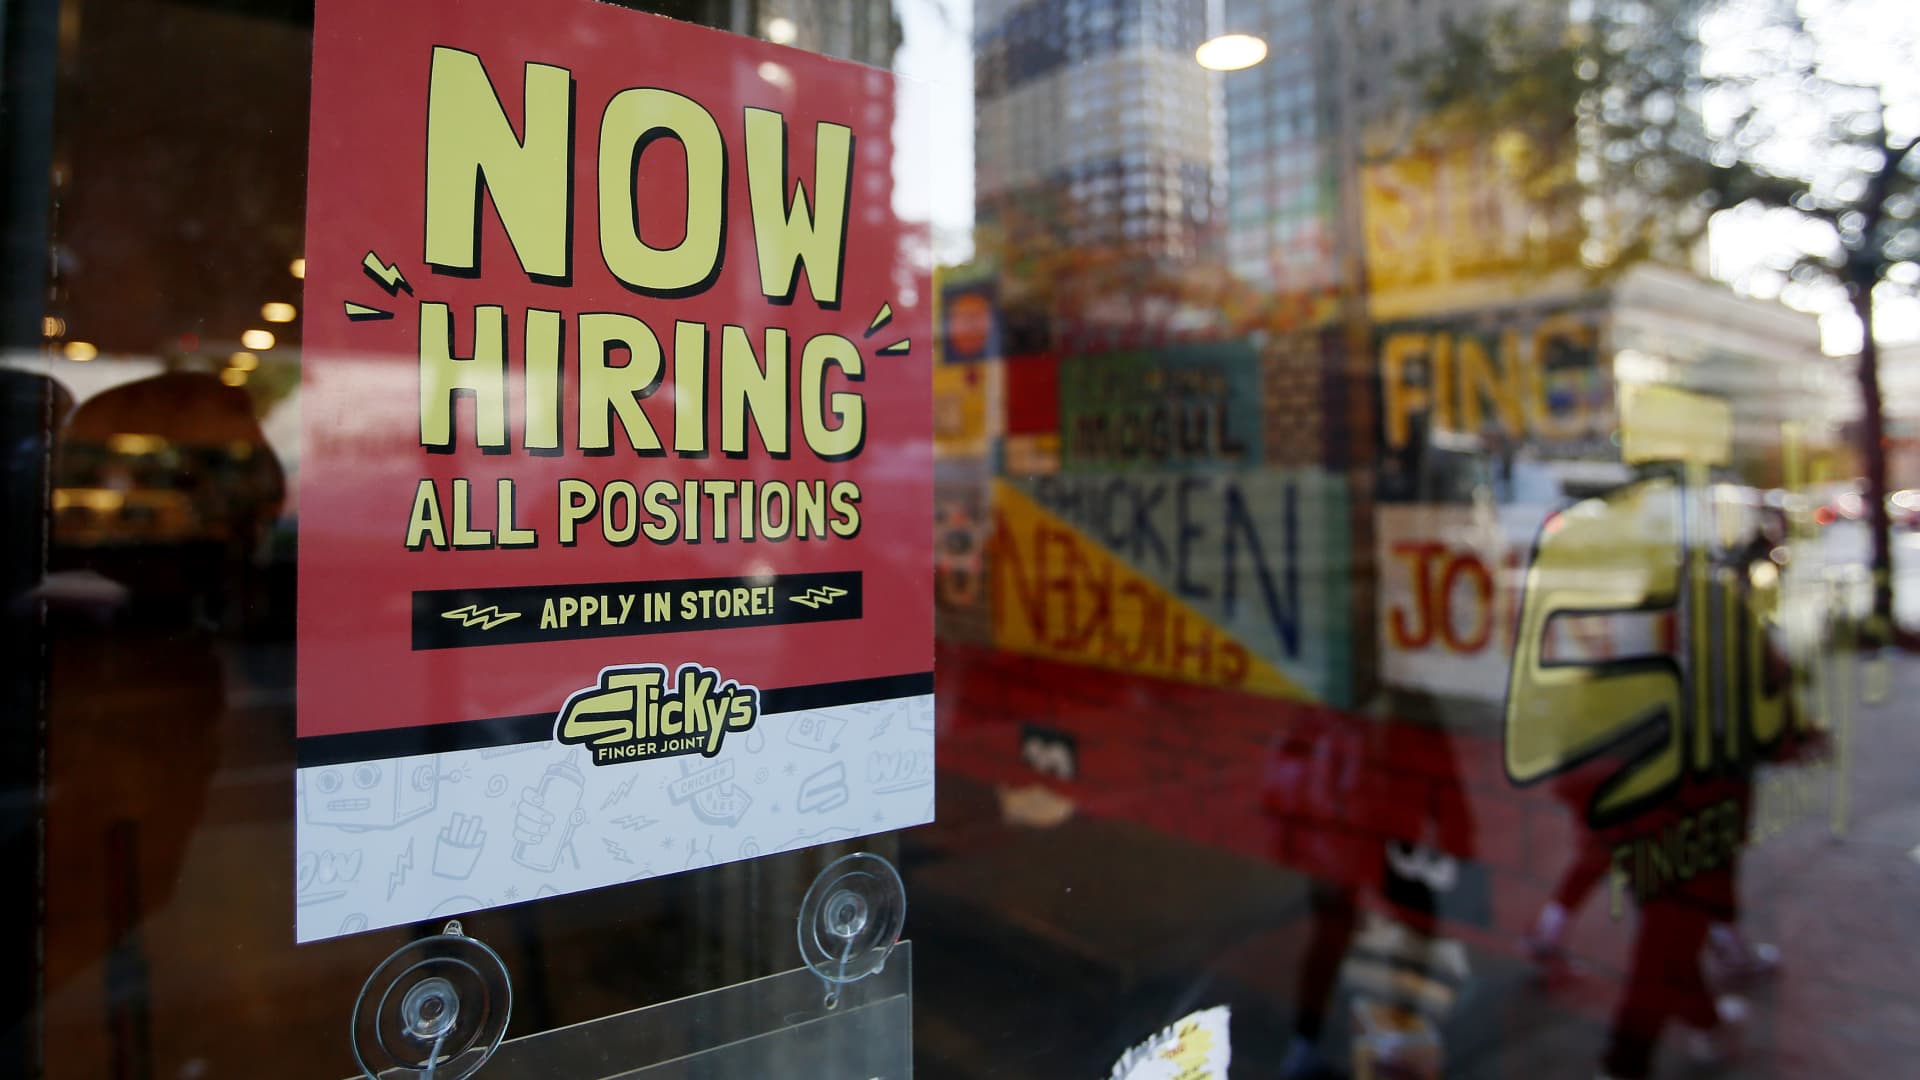 Unemployment rate unexpectedly rose to 3.8% in August as payrolls increased by 187,000